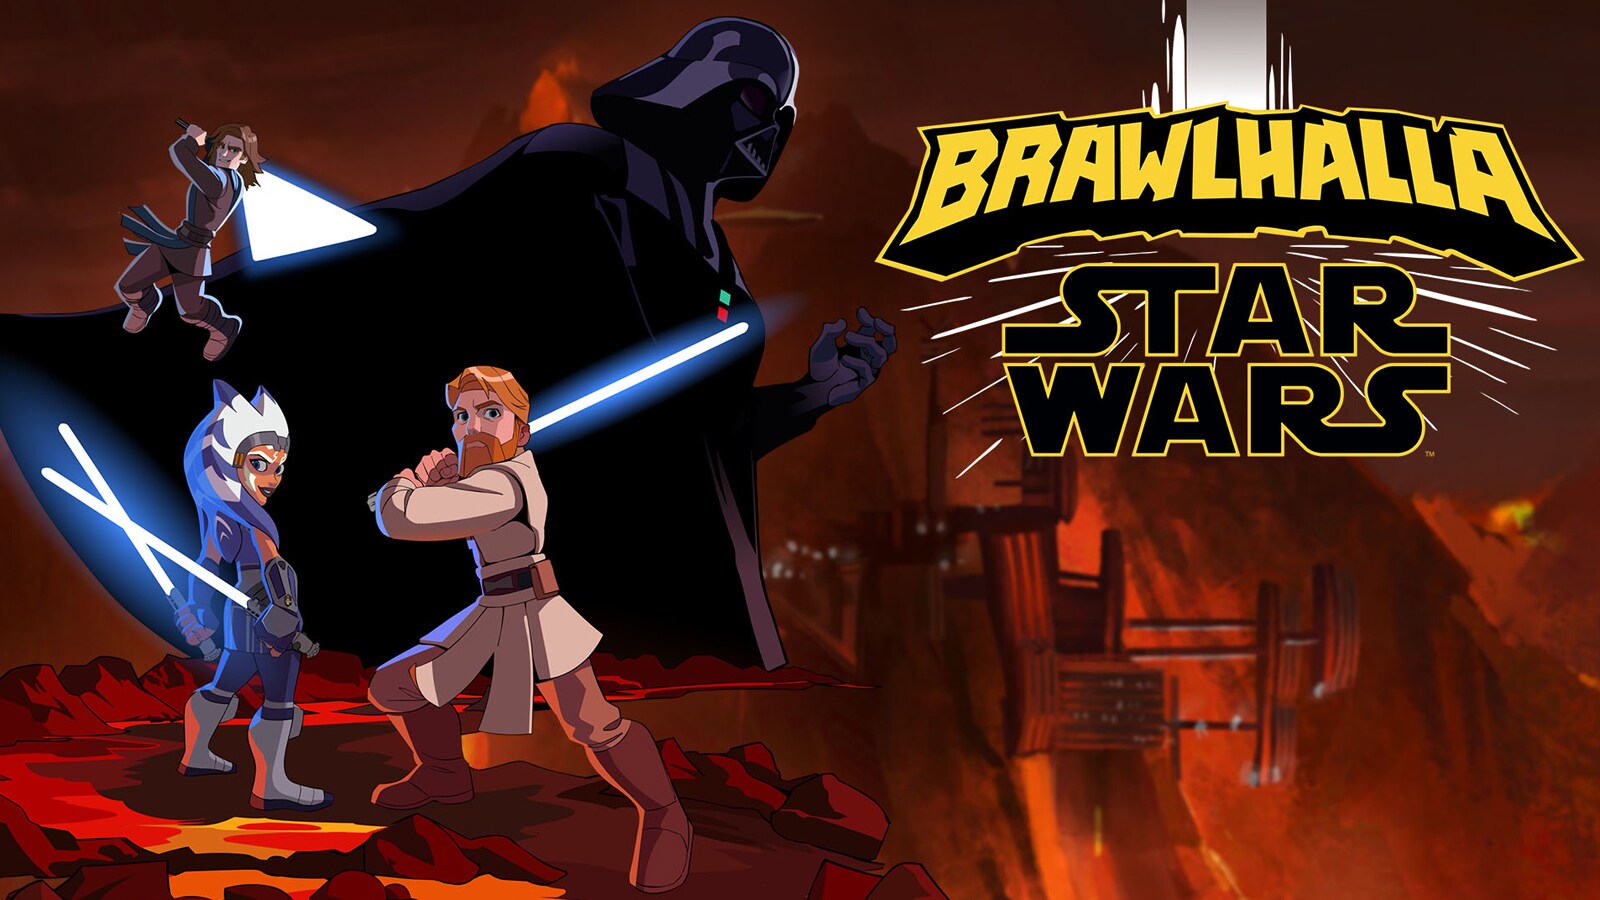 Take the High Ground in the Brawlhalla Star Wars Event - Available Now